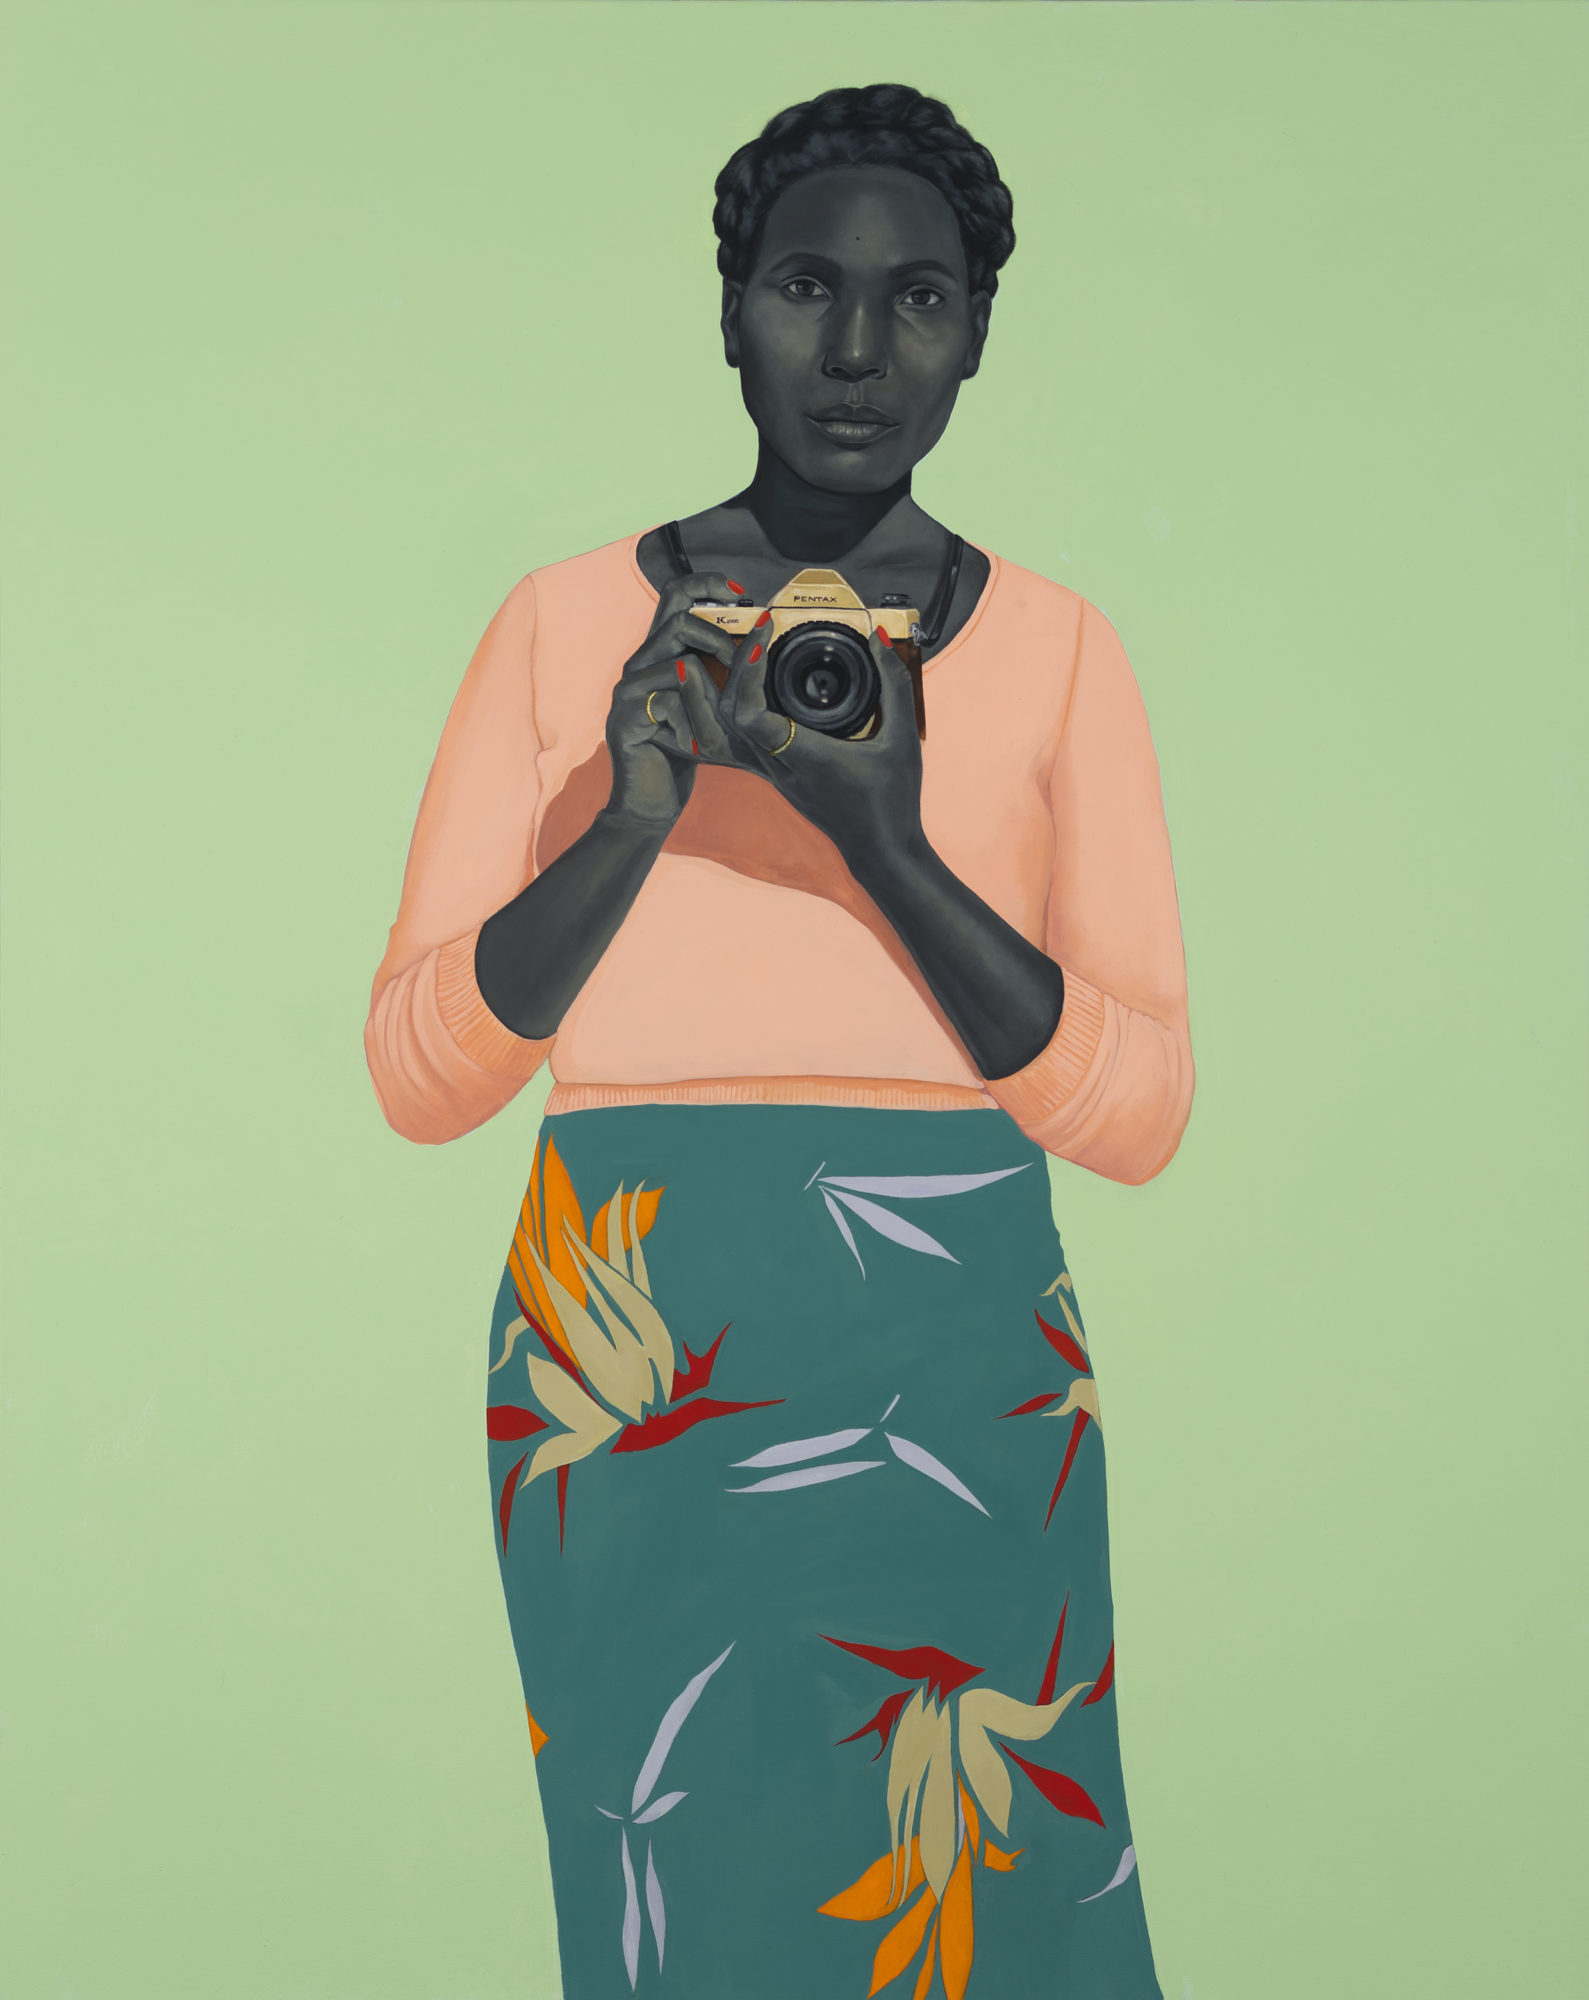 A woman holding a camera, wearing a floral skirt, holds a camera in front of a green background